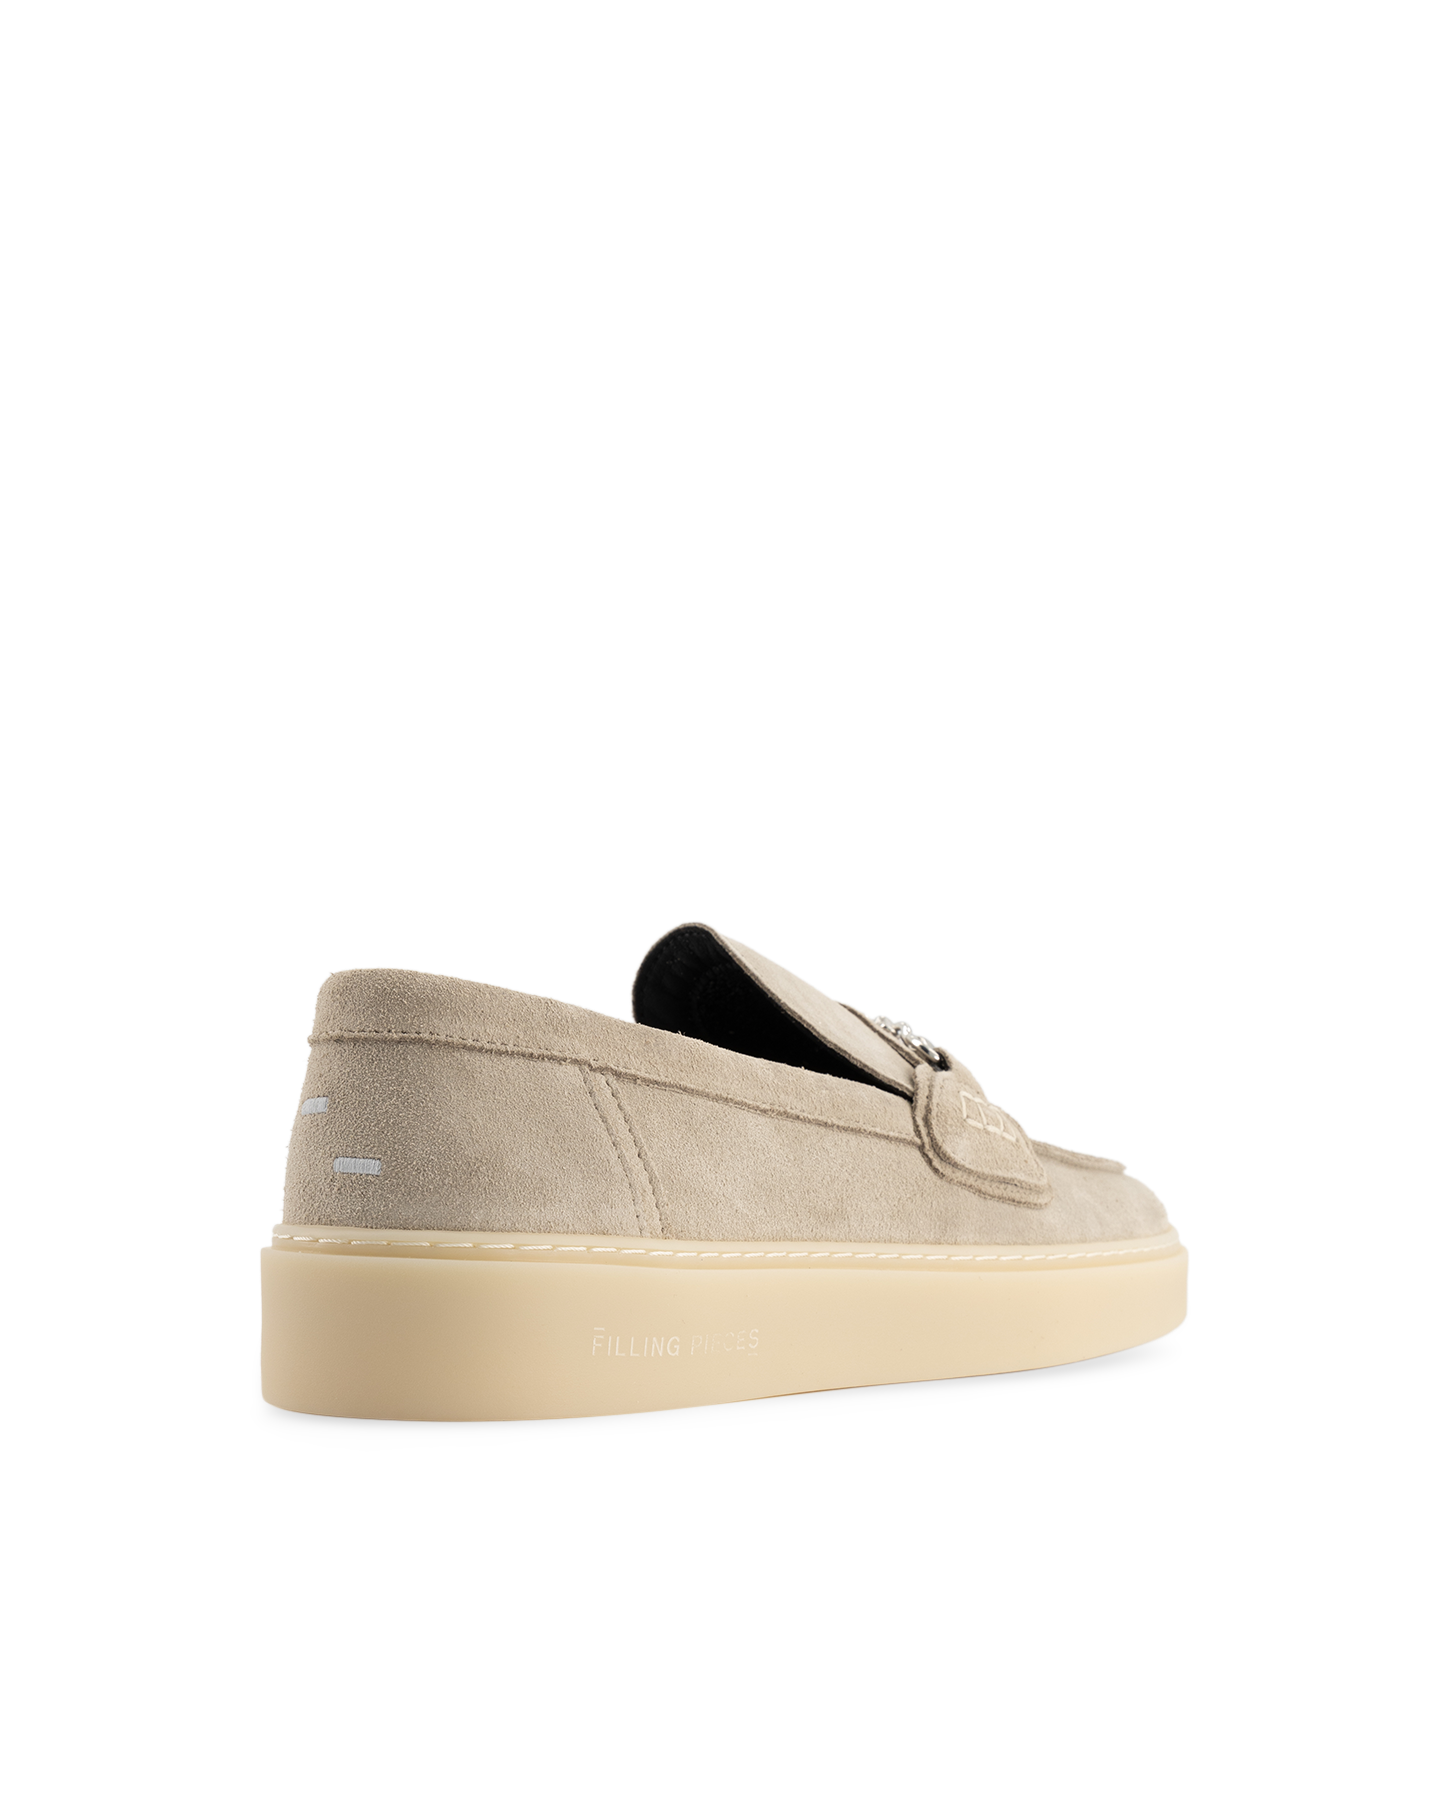 Filling Pieces Core Loafer Suede Taupe TAUPE 3